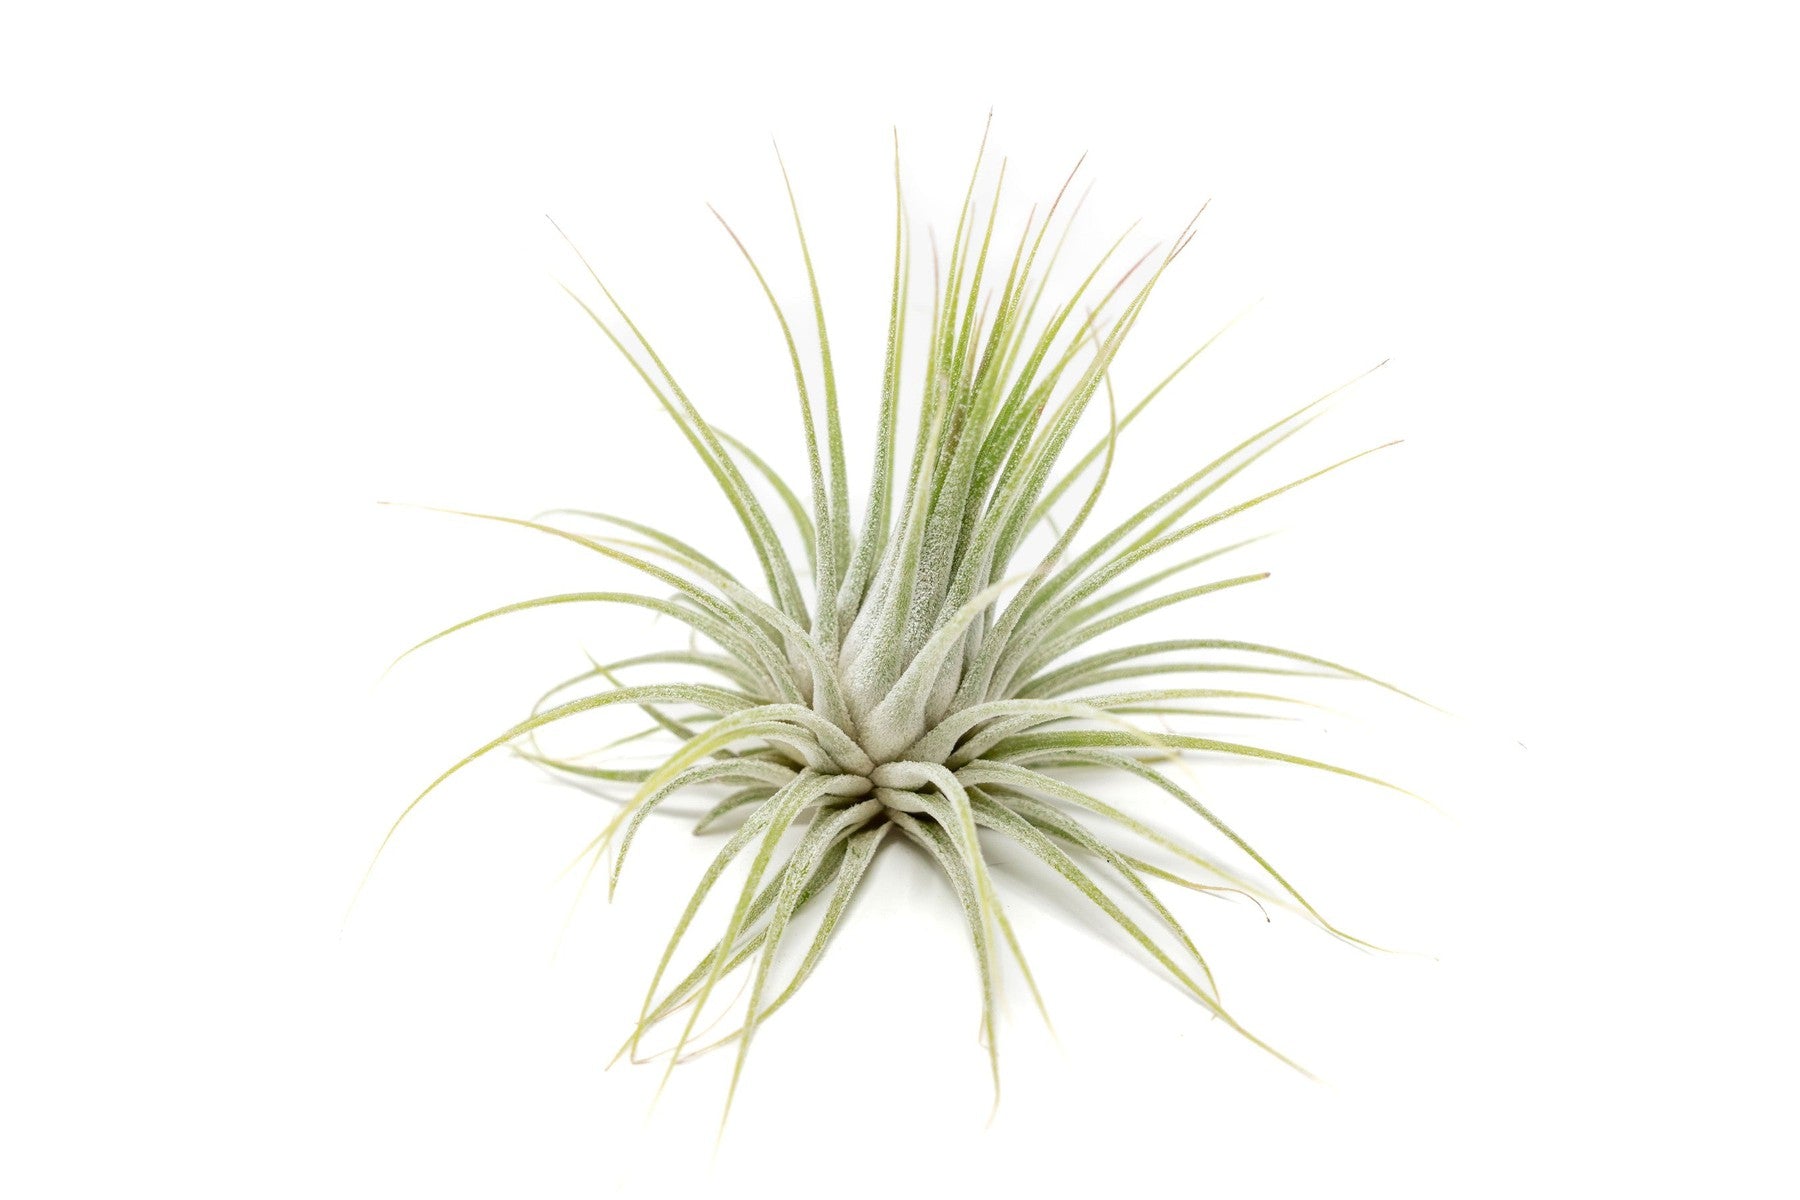 SALE - XL Tillandsia Ionantha Guatemala Air Plants - Set of 10 or 20 - 40% Off-airplant-The Succulent Source